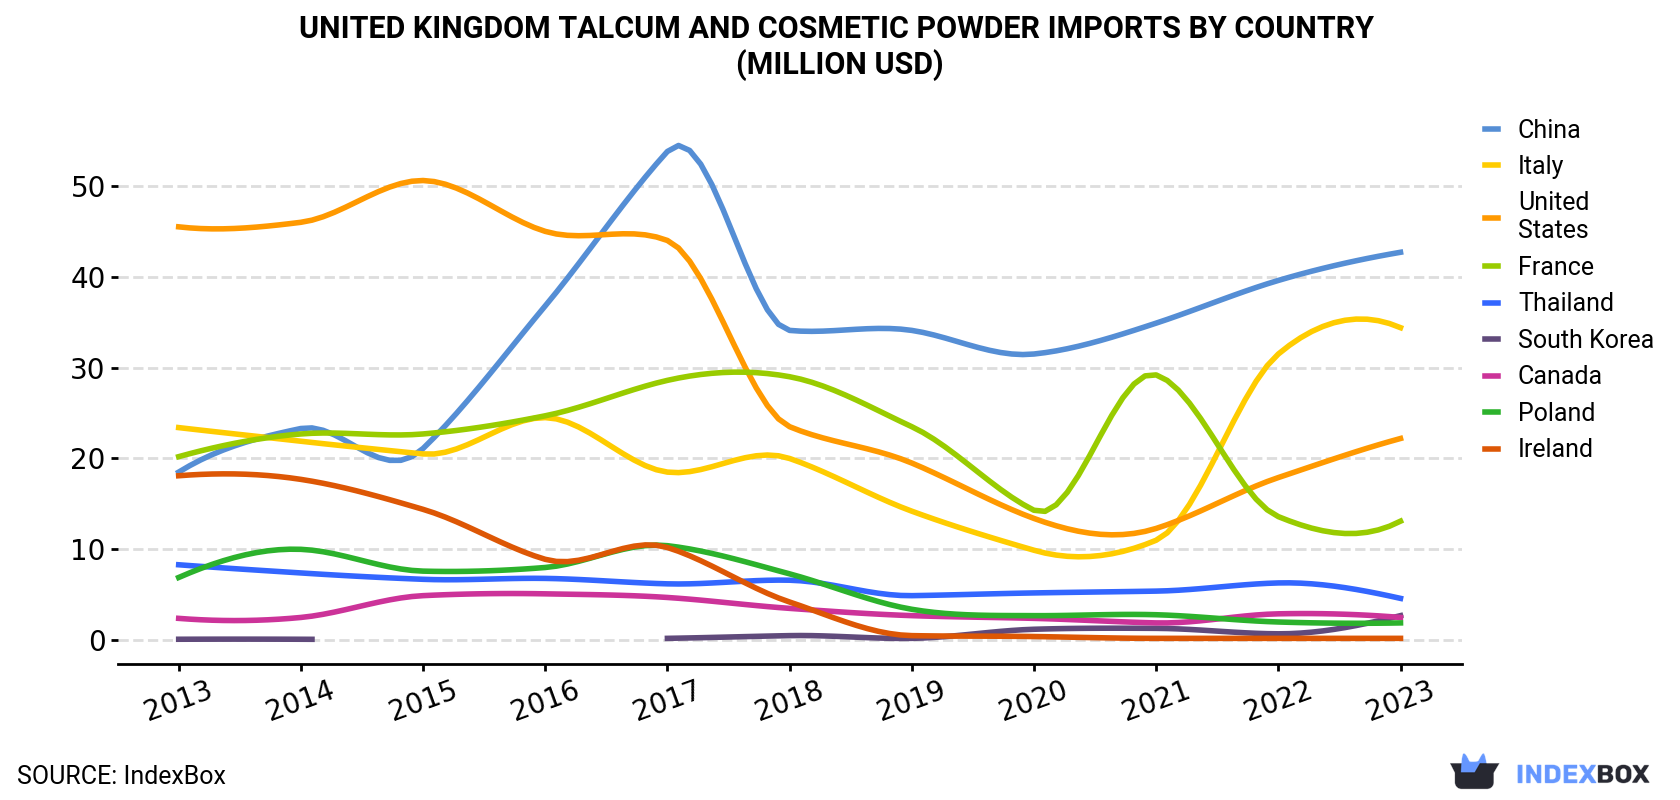 United Kingdom Talcum and Cosmetic Powder Imports By Country (Million USD)